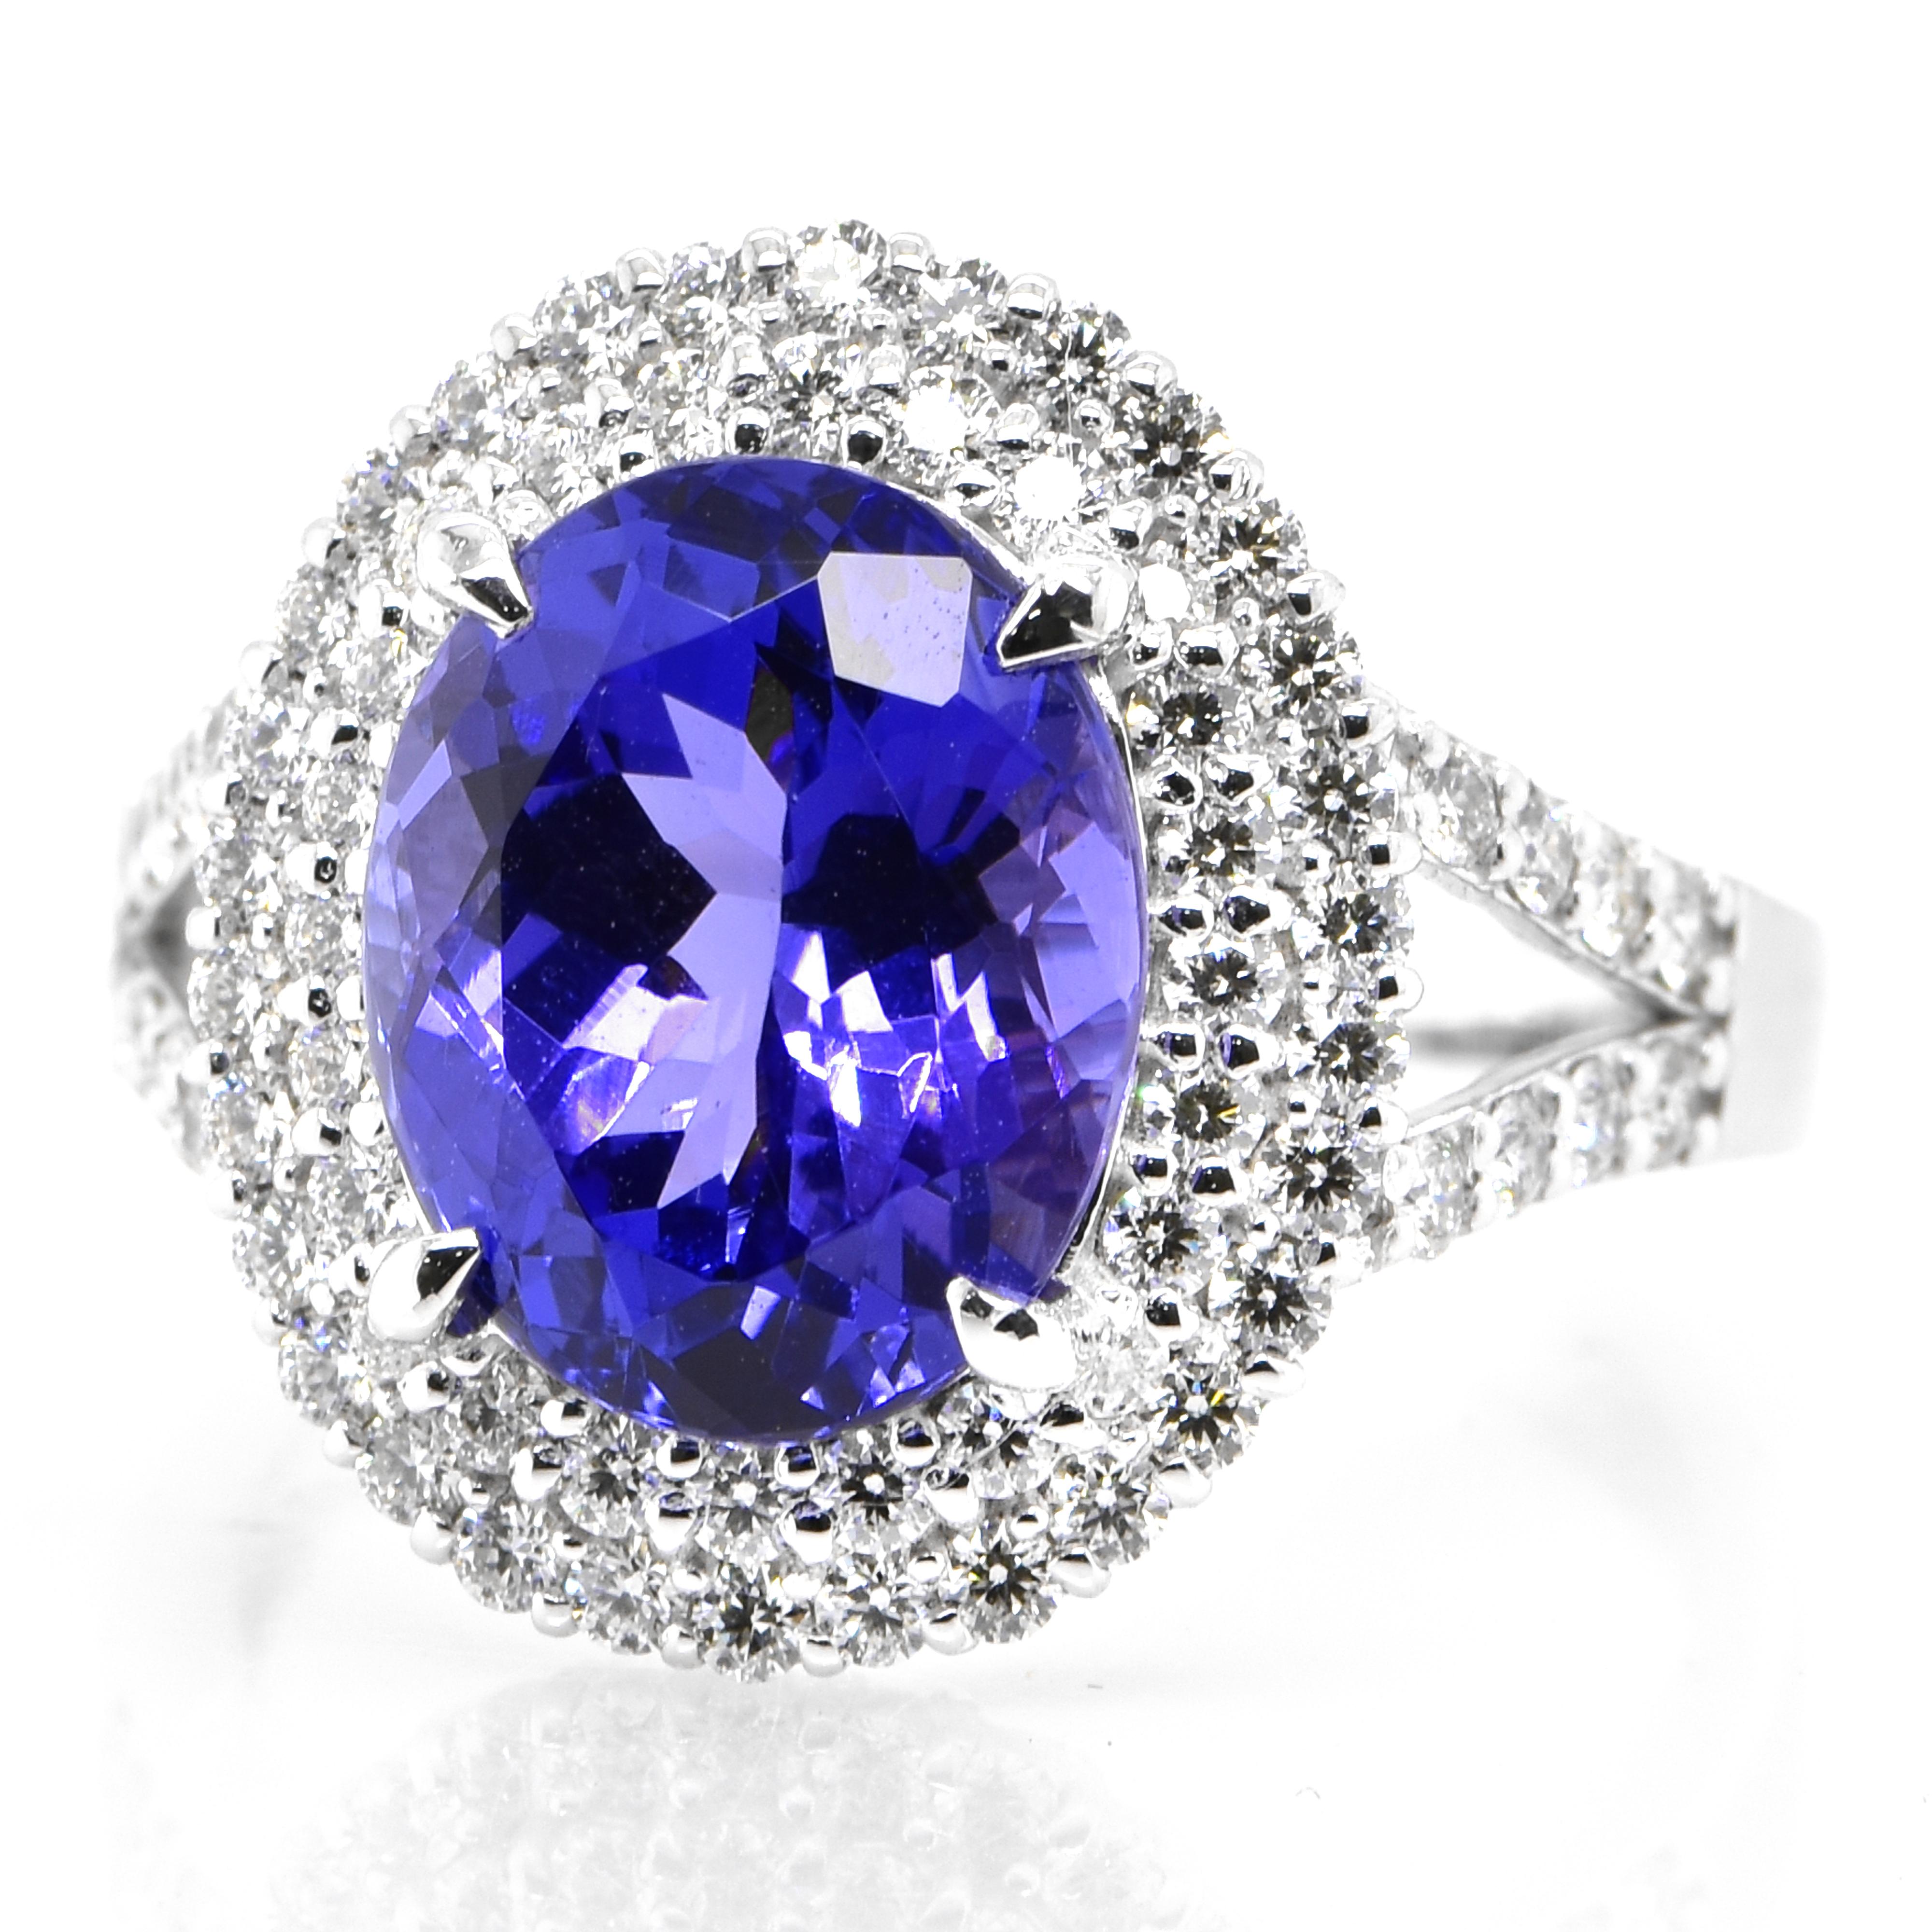 A beautiful ring featuring a 4.26 Carat Natural Tanzanite and 0.72 Carats Diamond Accents set in Platinum. Tanzanite's name was given by Tiffany and Co after its only known source: Tanzania. Tanzanite displays beautiful pleochroic colors meaning